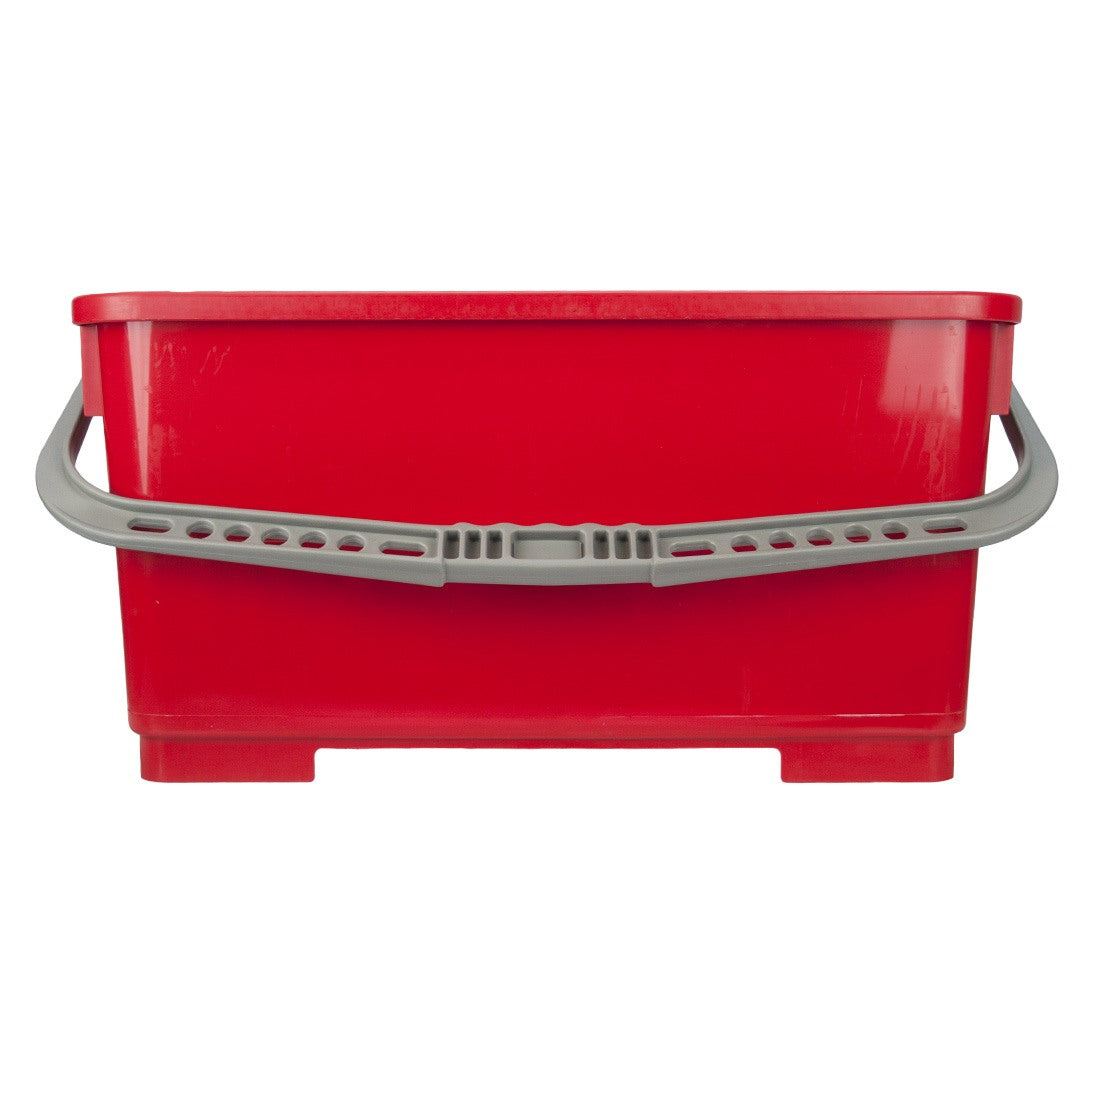 Red 6 Gallon Pulex Bucket with Grey Handle Front View